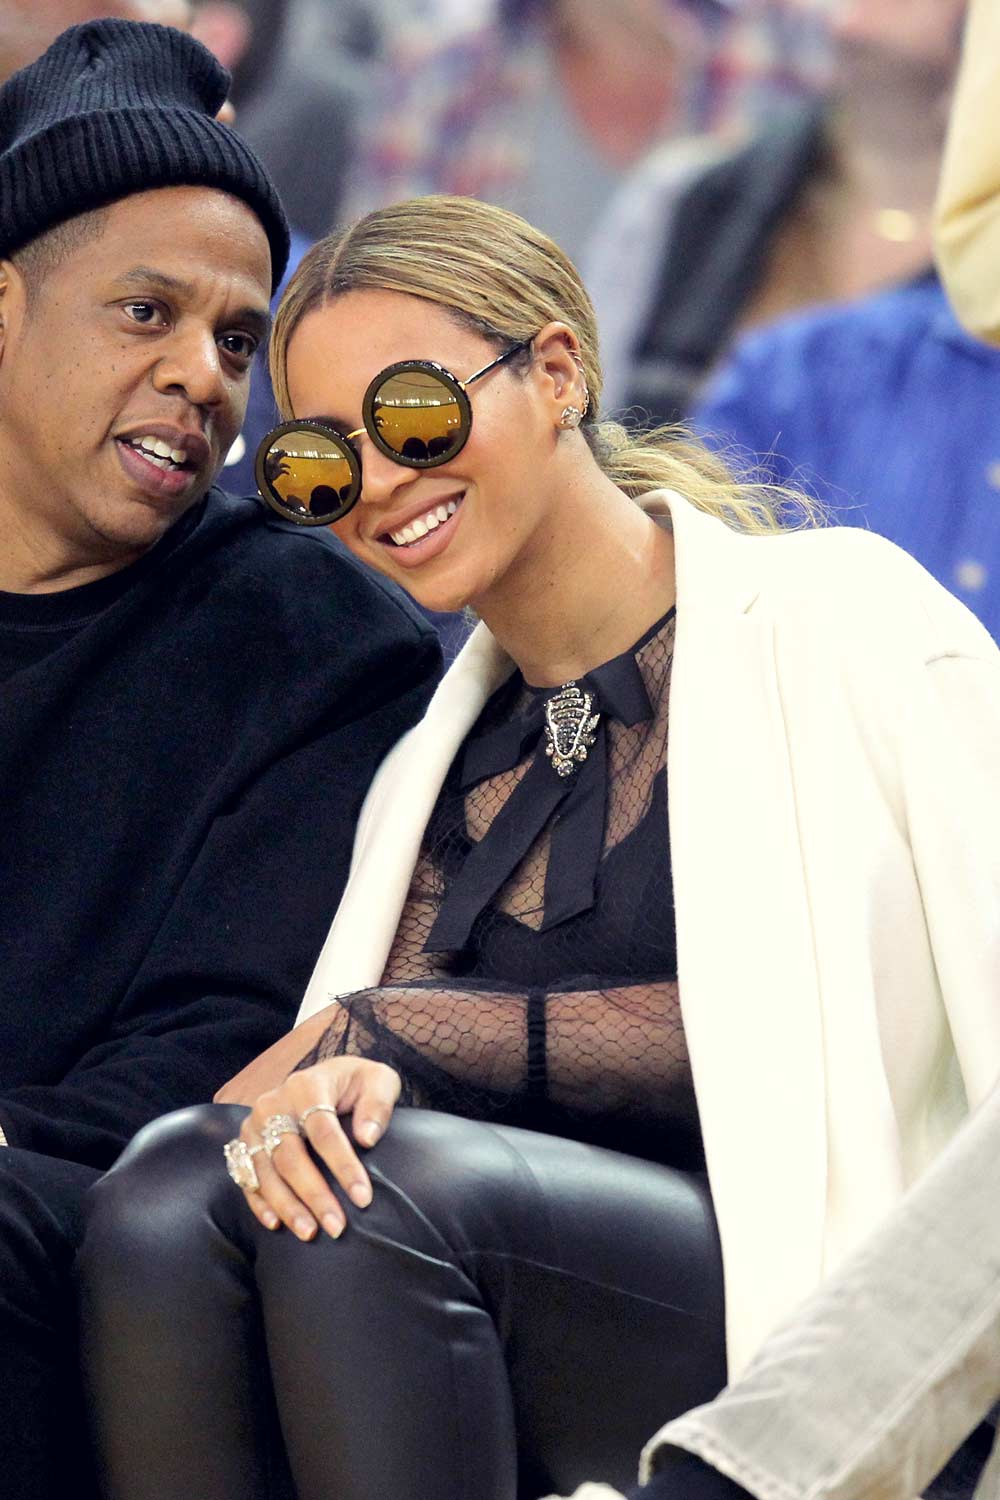 Beyonce at Oklahoma City Thunder vs. Golden State Warriors game